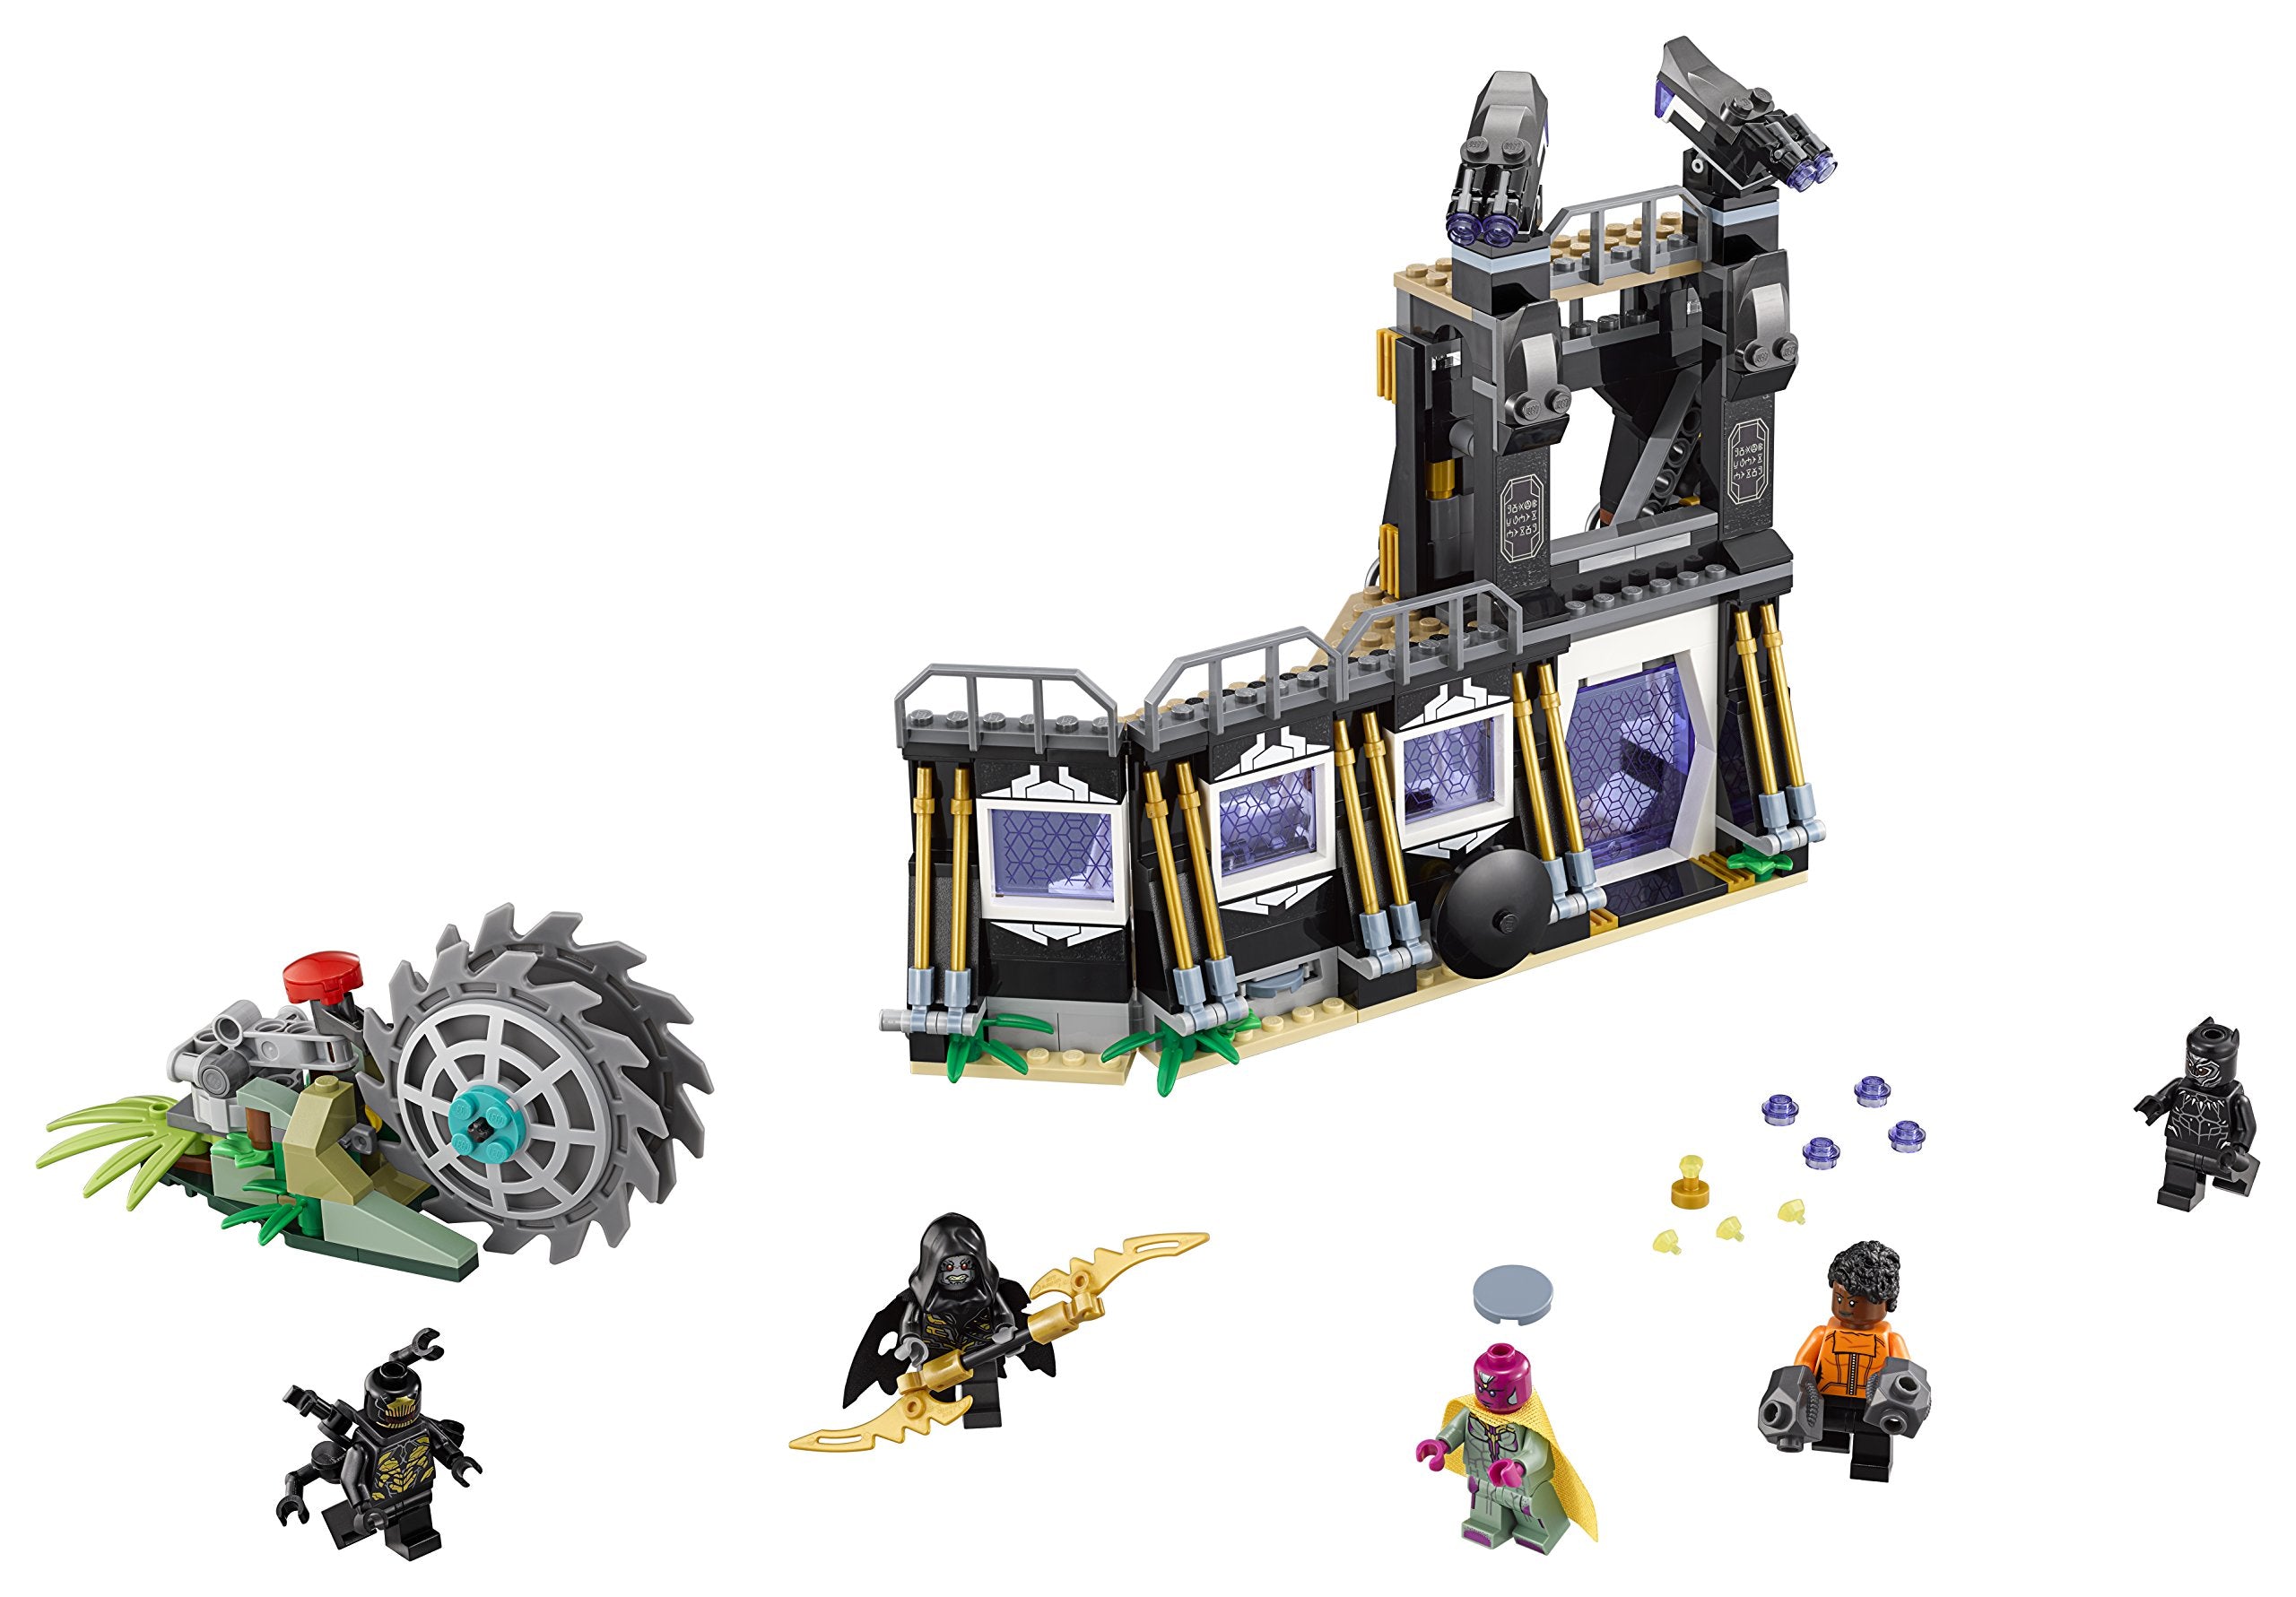 LEGO Marvel Super Heroes Avengers: Infinity War Corvus Glaive Thresher Attack 76103 Building Kit (416 Piece)